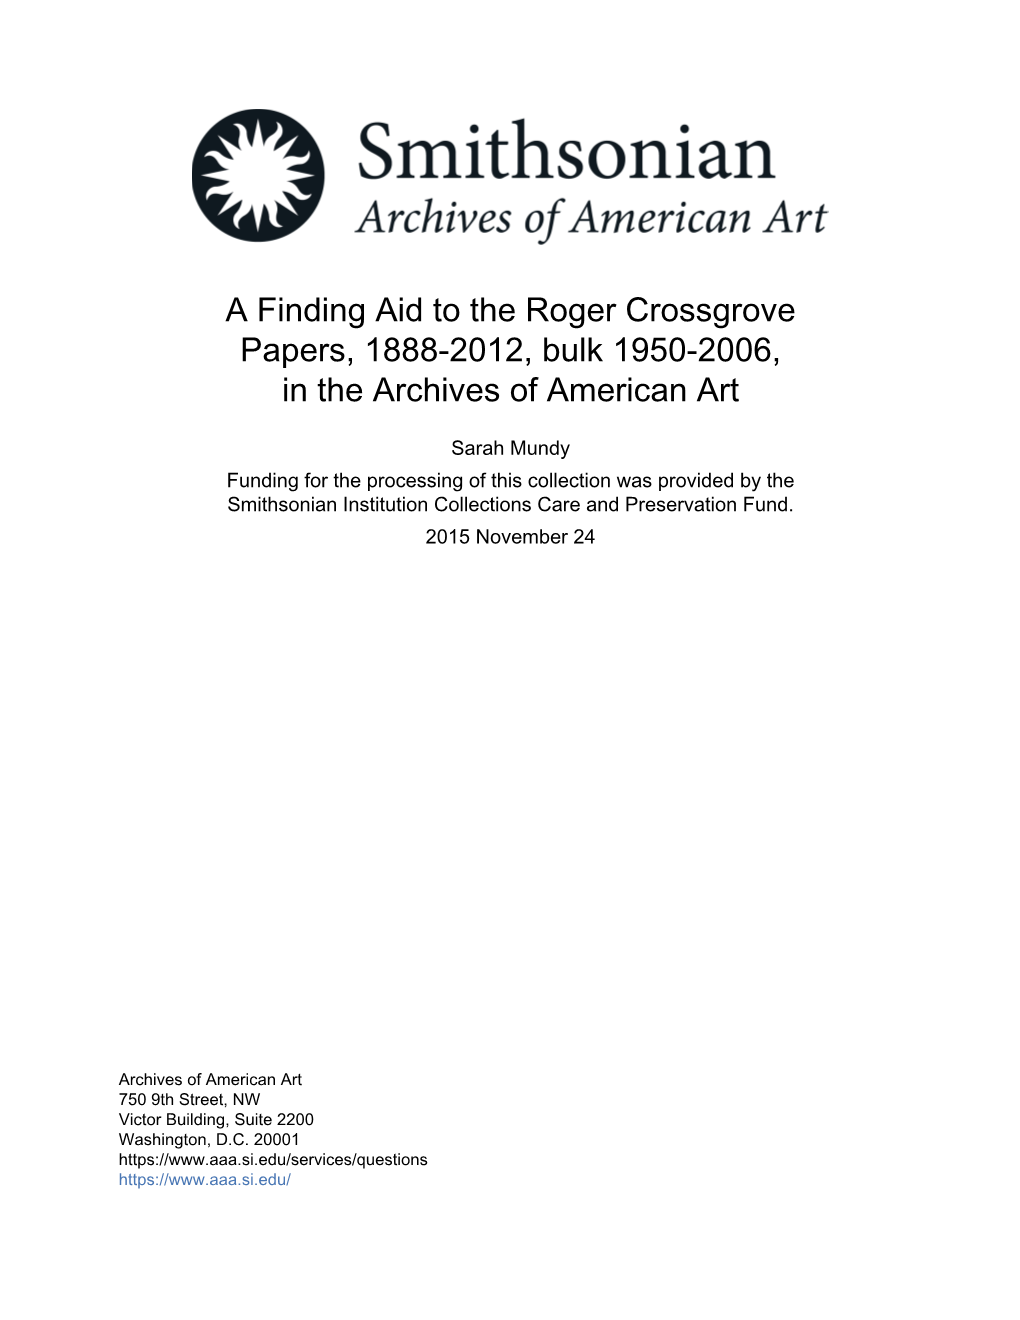 A Finding Aid to the Roger Crossgrove Papers, 1888-2012, Bulk 1950-2006, in the Archives of American Art